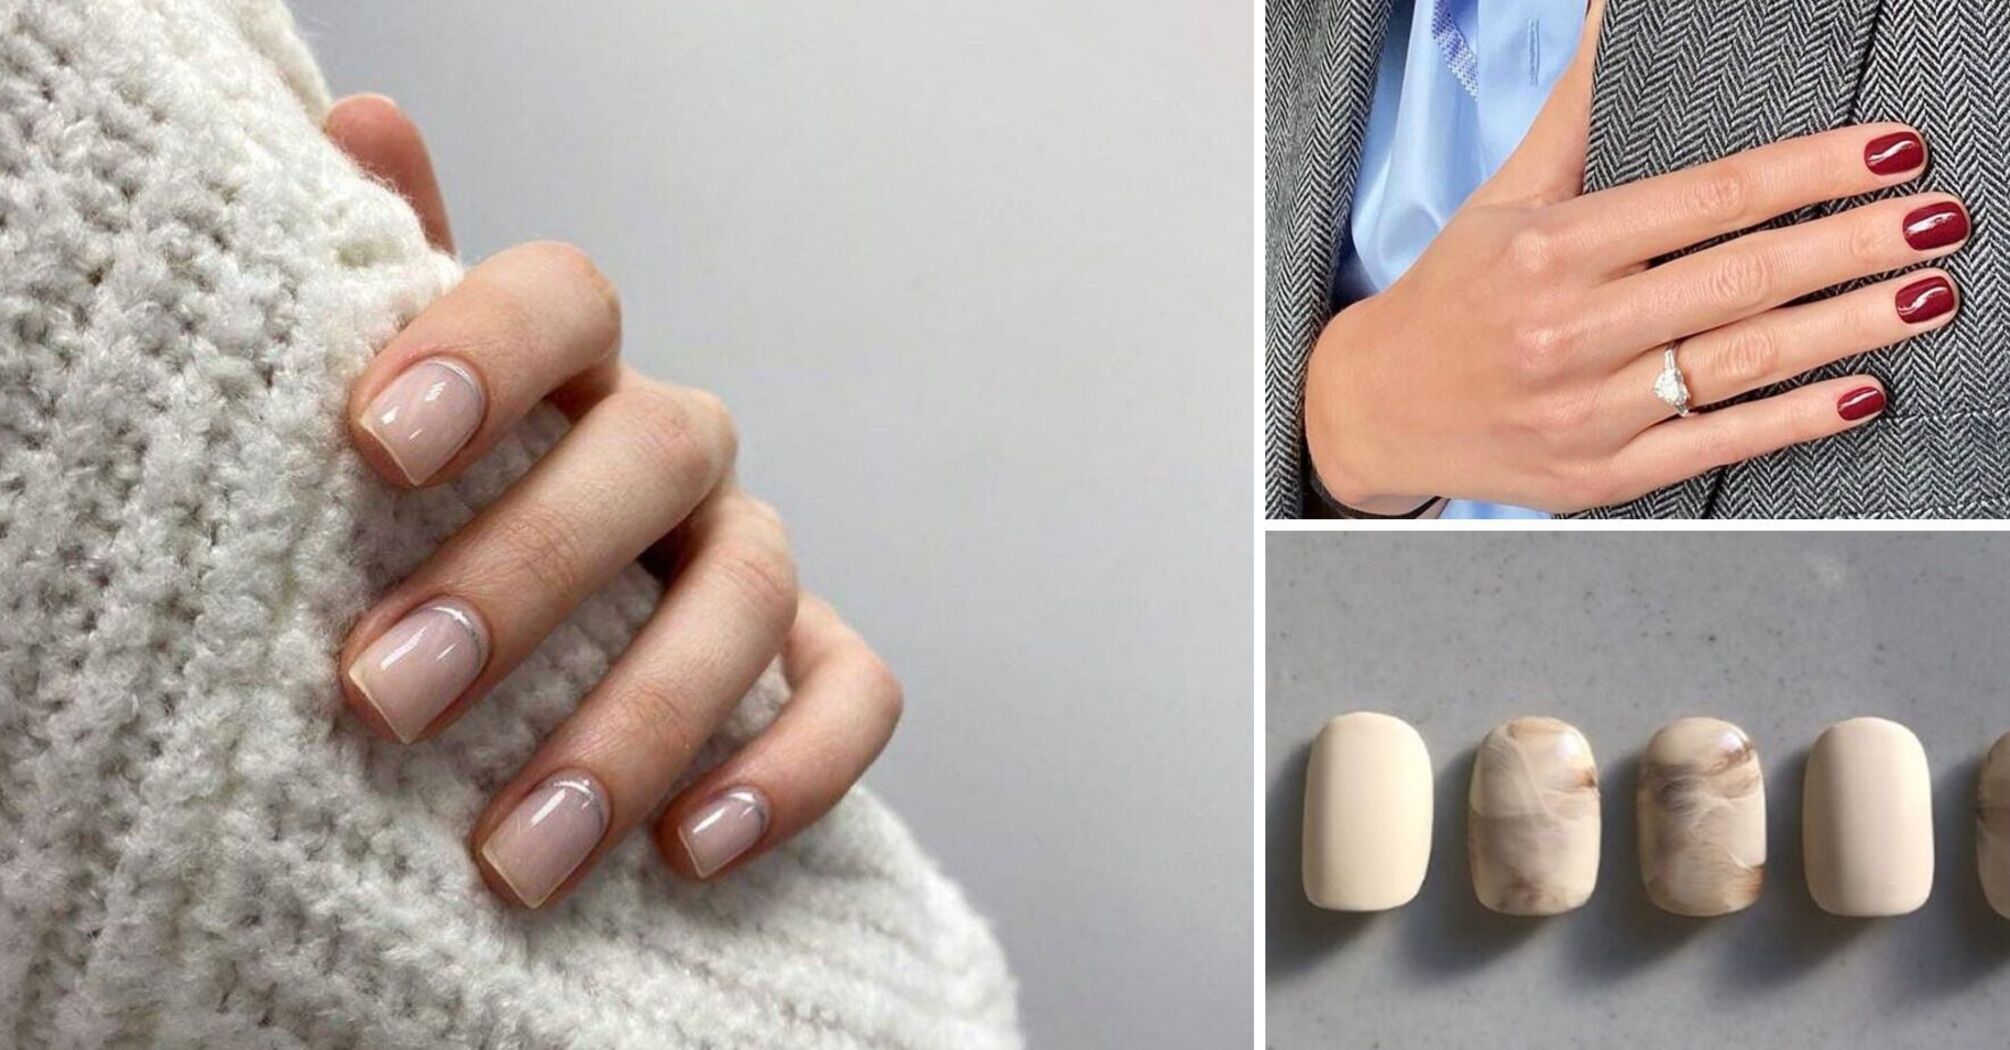 Expensive Looking Nails: Nail Art For The Quiet Luxury Trend